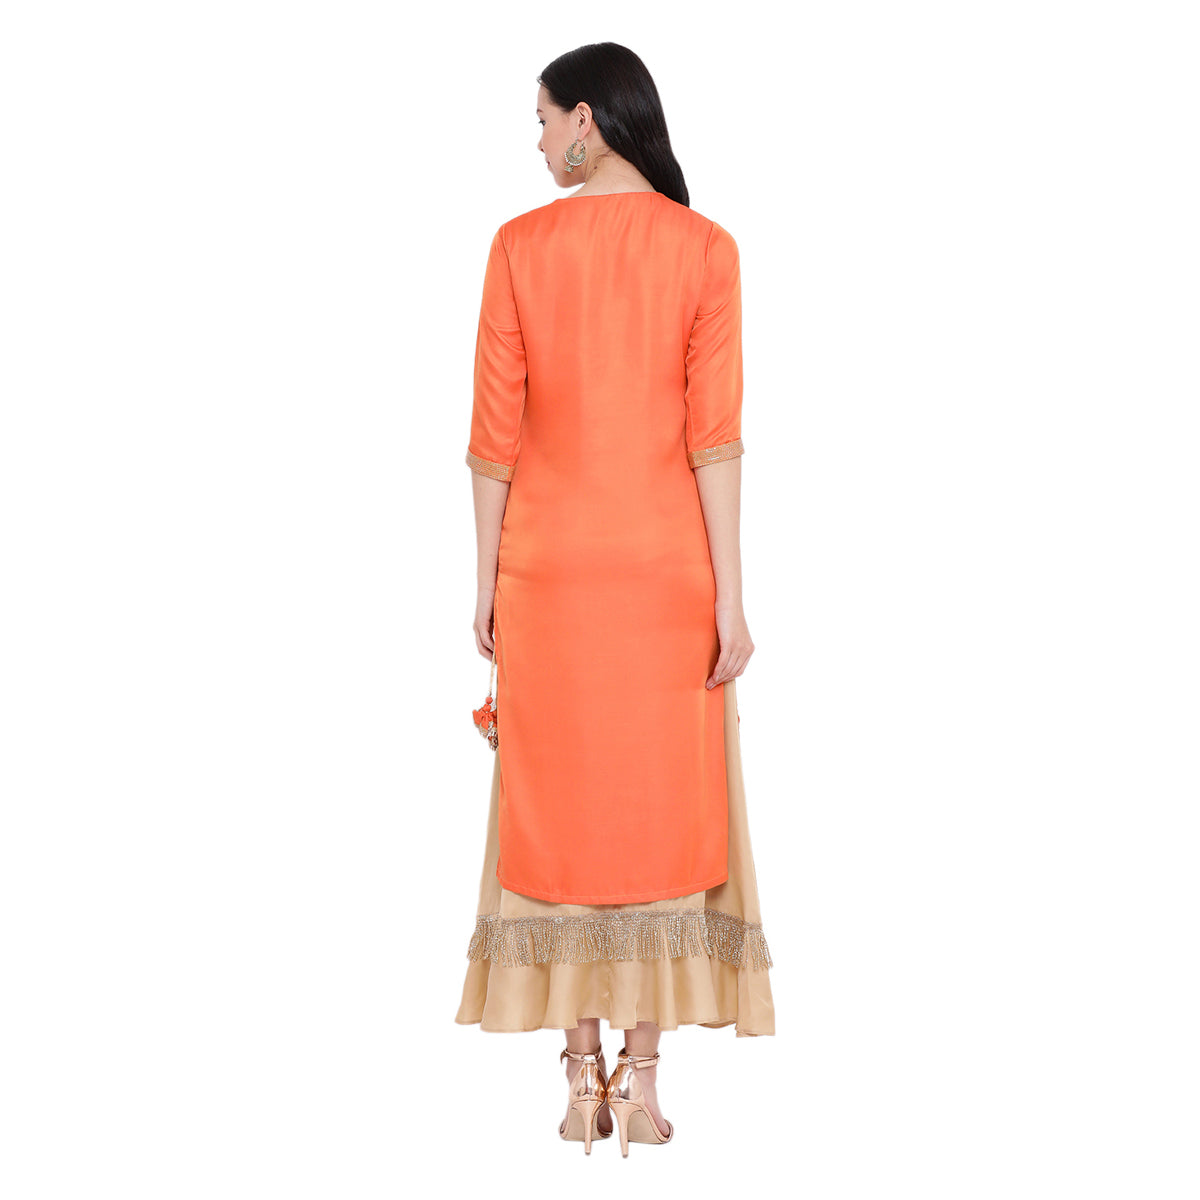 Peach kurta with abstract embroidery